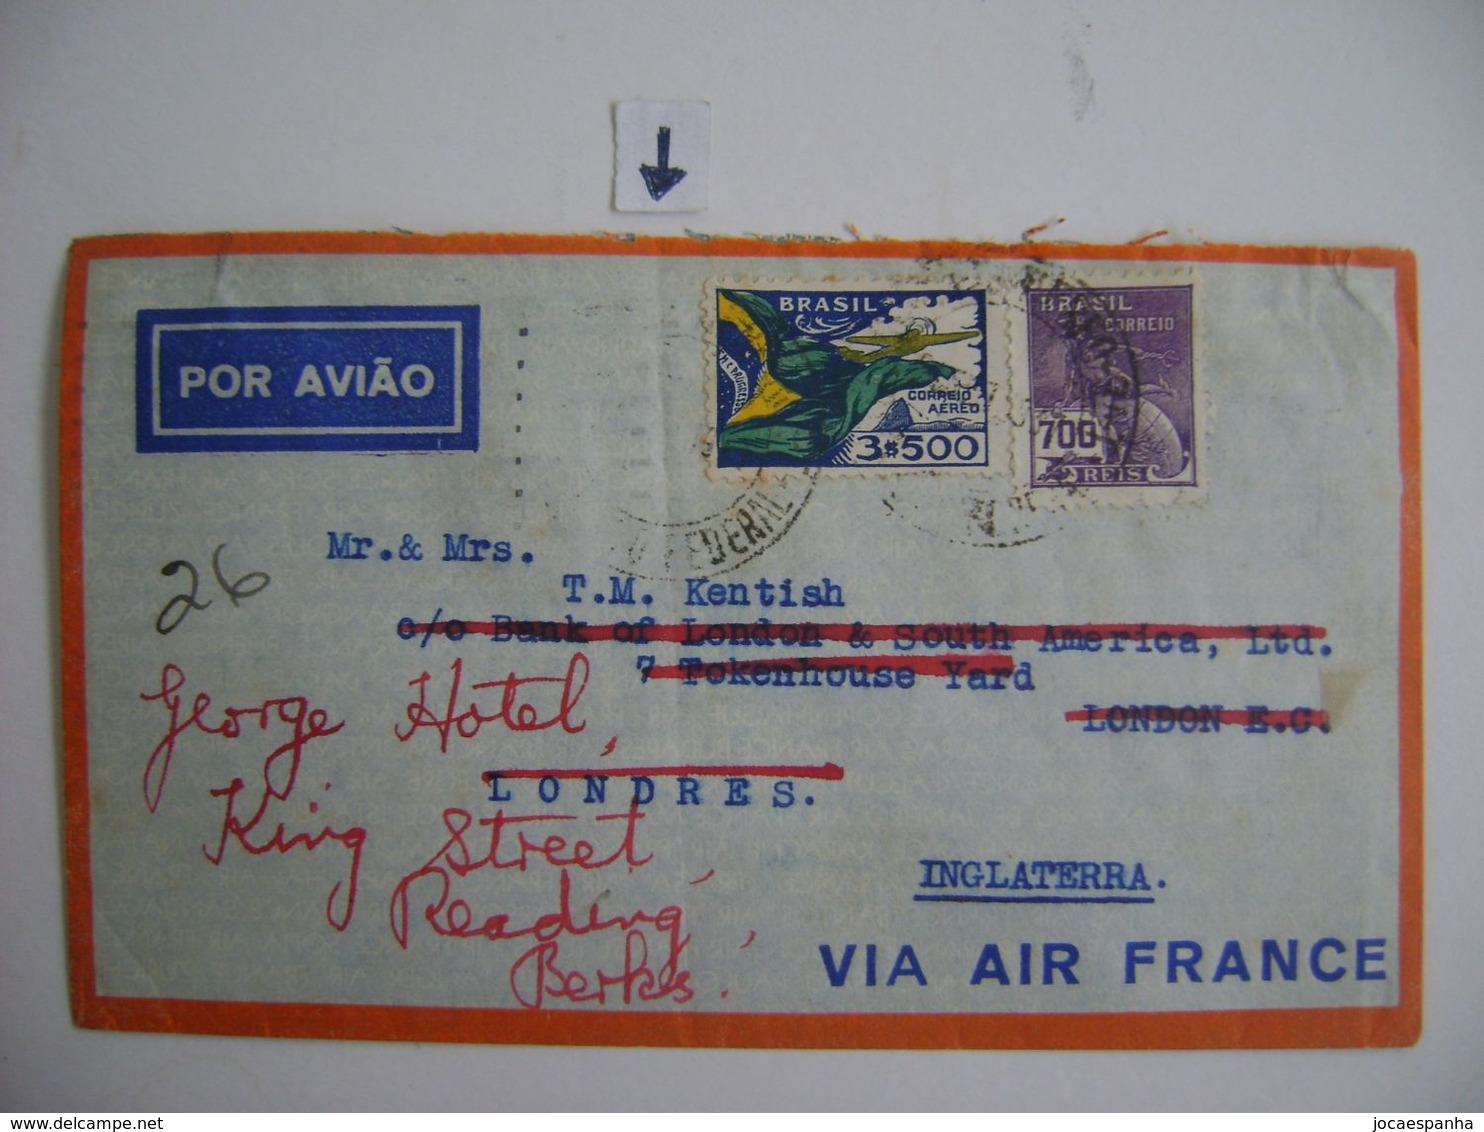 BRAZIL / BRASIL - LETTER SENT FROM RIO DE JANEIRO TO LONDON (ENGLAND) IN 1938(?) "AIR FRANCE" IN THE STATE - Cartas & Documentos